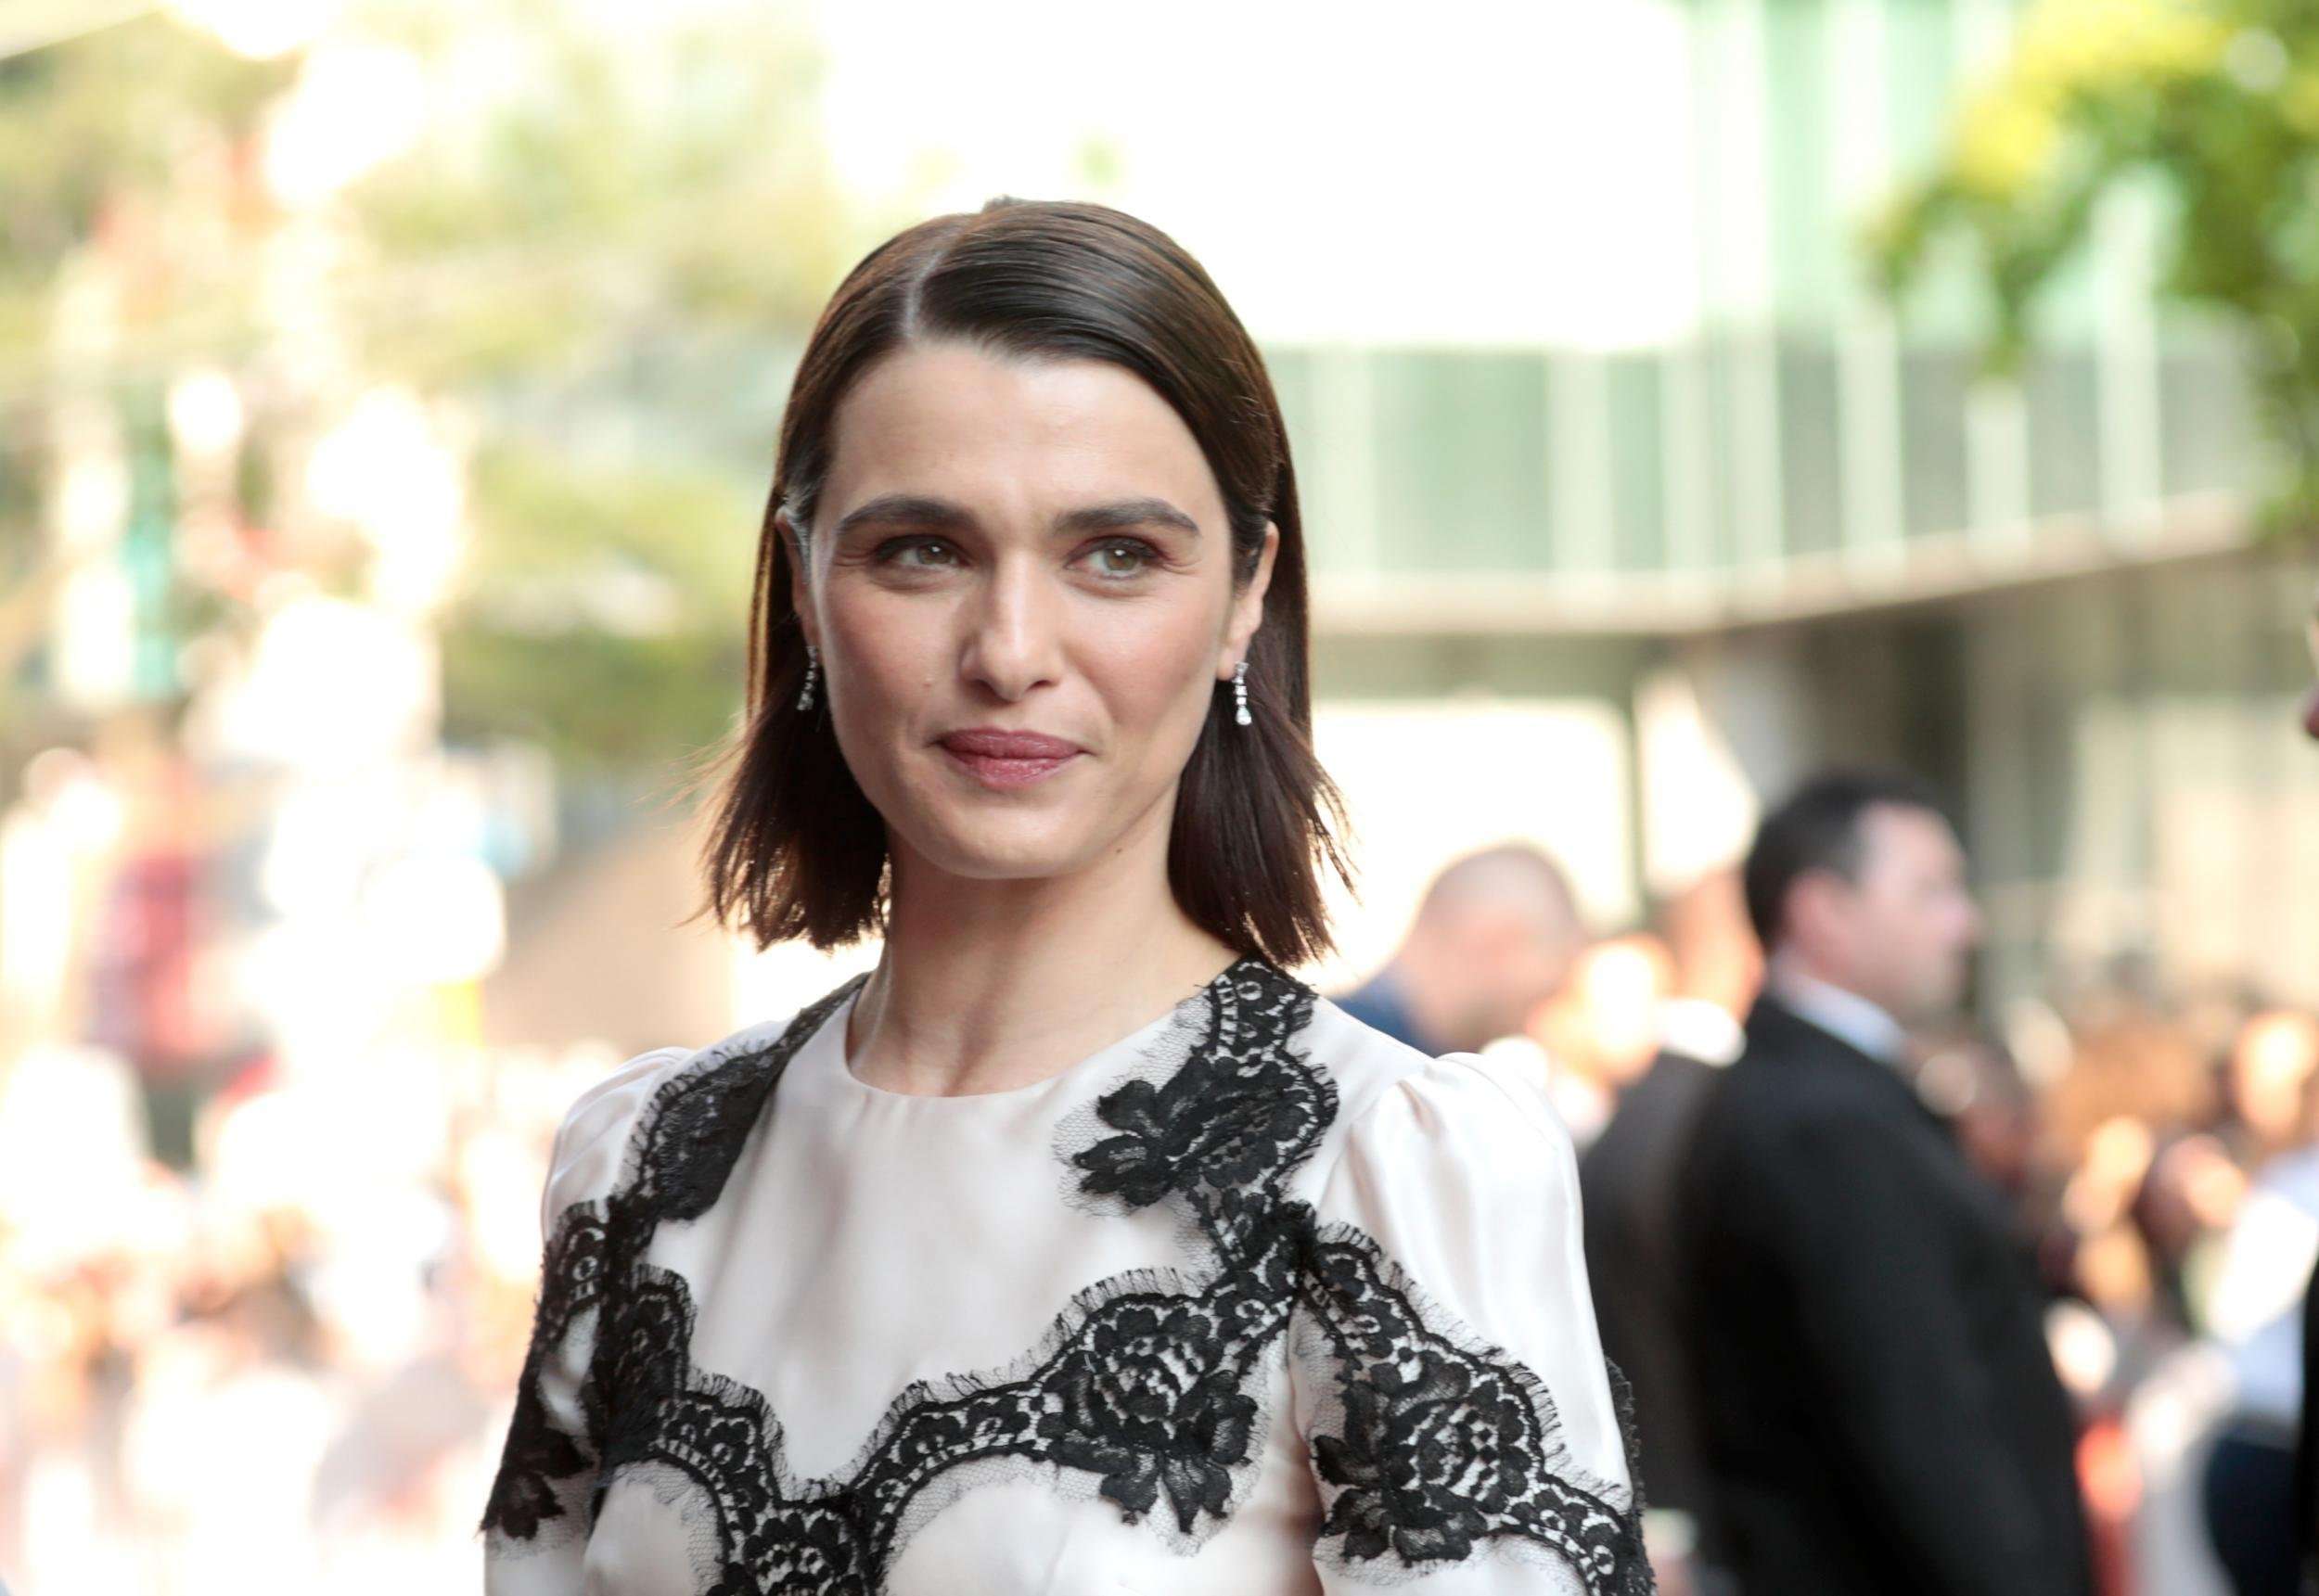 image for Rachel Weisz doesn't think female James Bond is a good idea: 'Women should get their own stories'